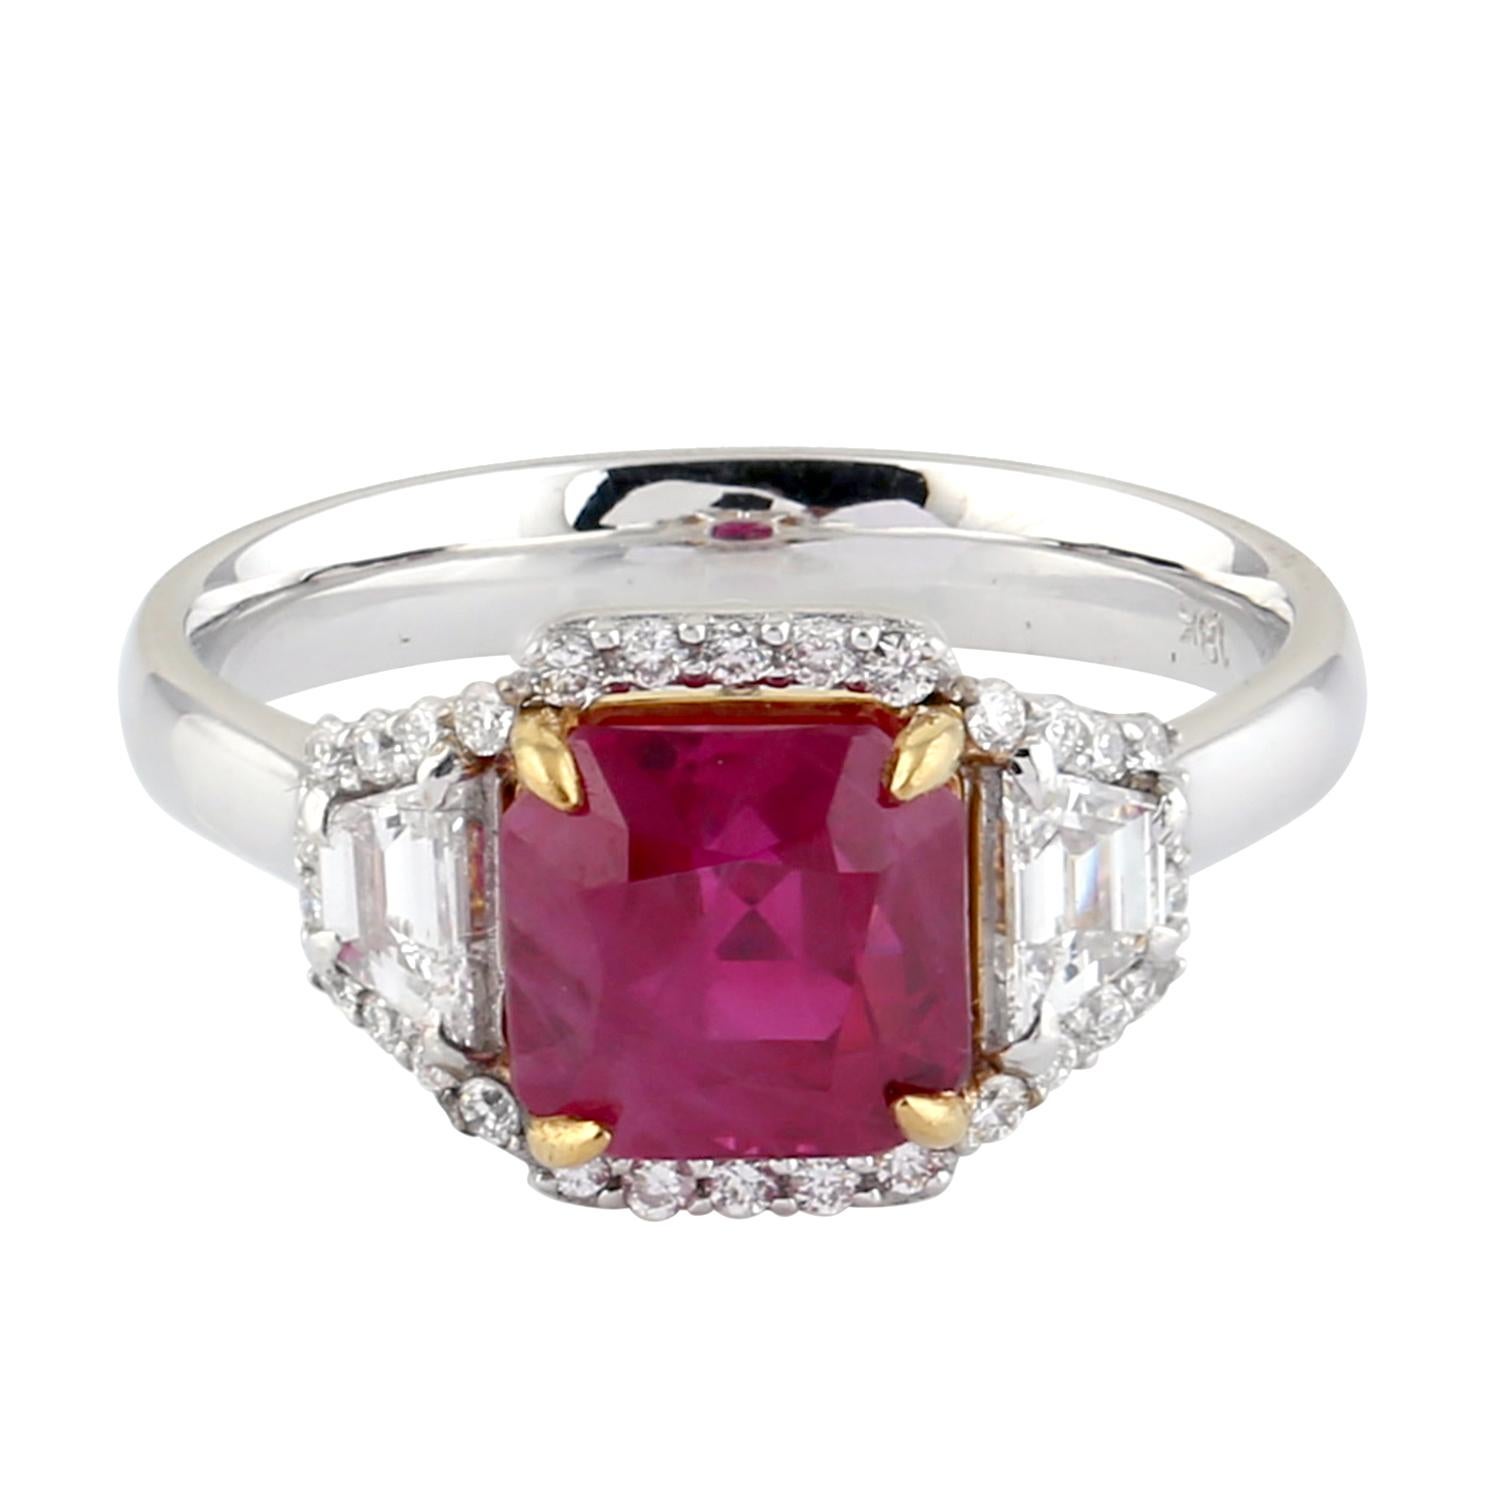 Pretty looking Cushion Shape Ruby ring with Diamond Baguettes set in 18K White Gold can be worn for any occasion.

Ring Size: 6.25 ( can be sized )

18K Gold: 5.4gms
Diamond: .90cts
Ruby: 2.96cts